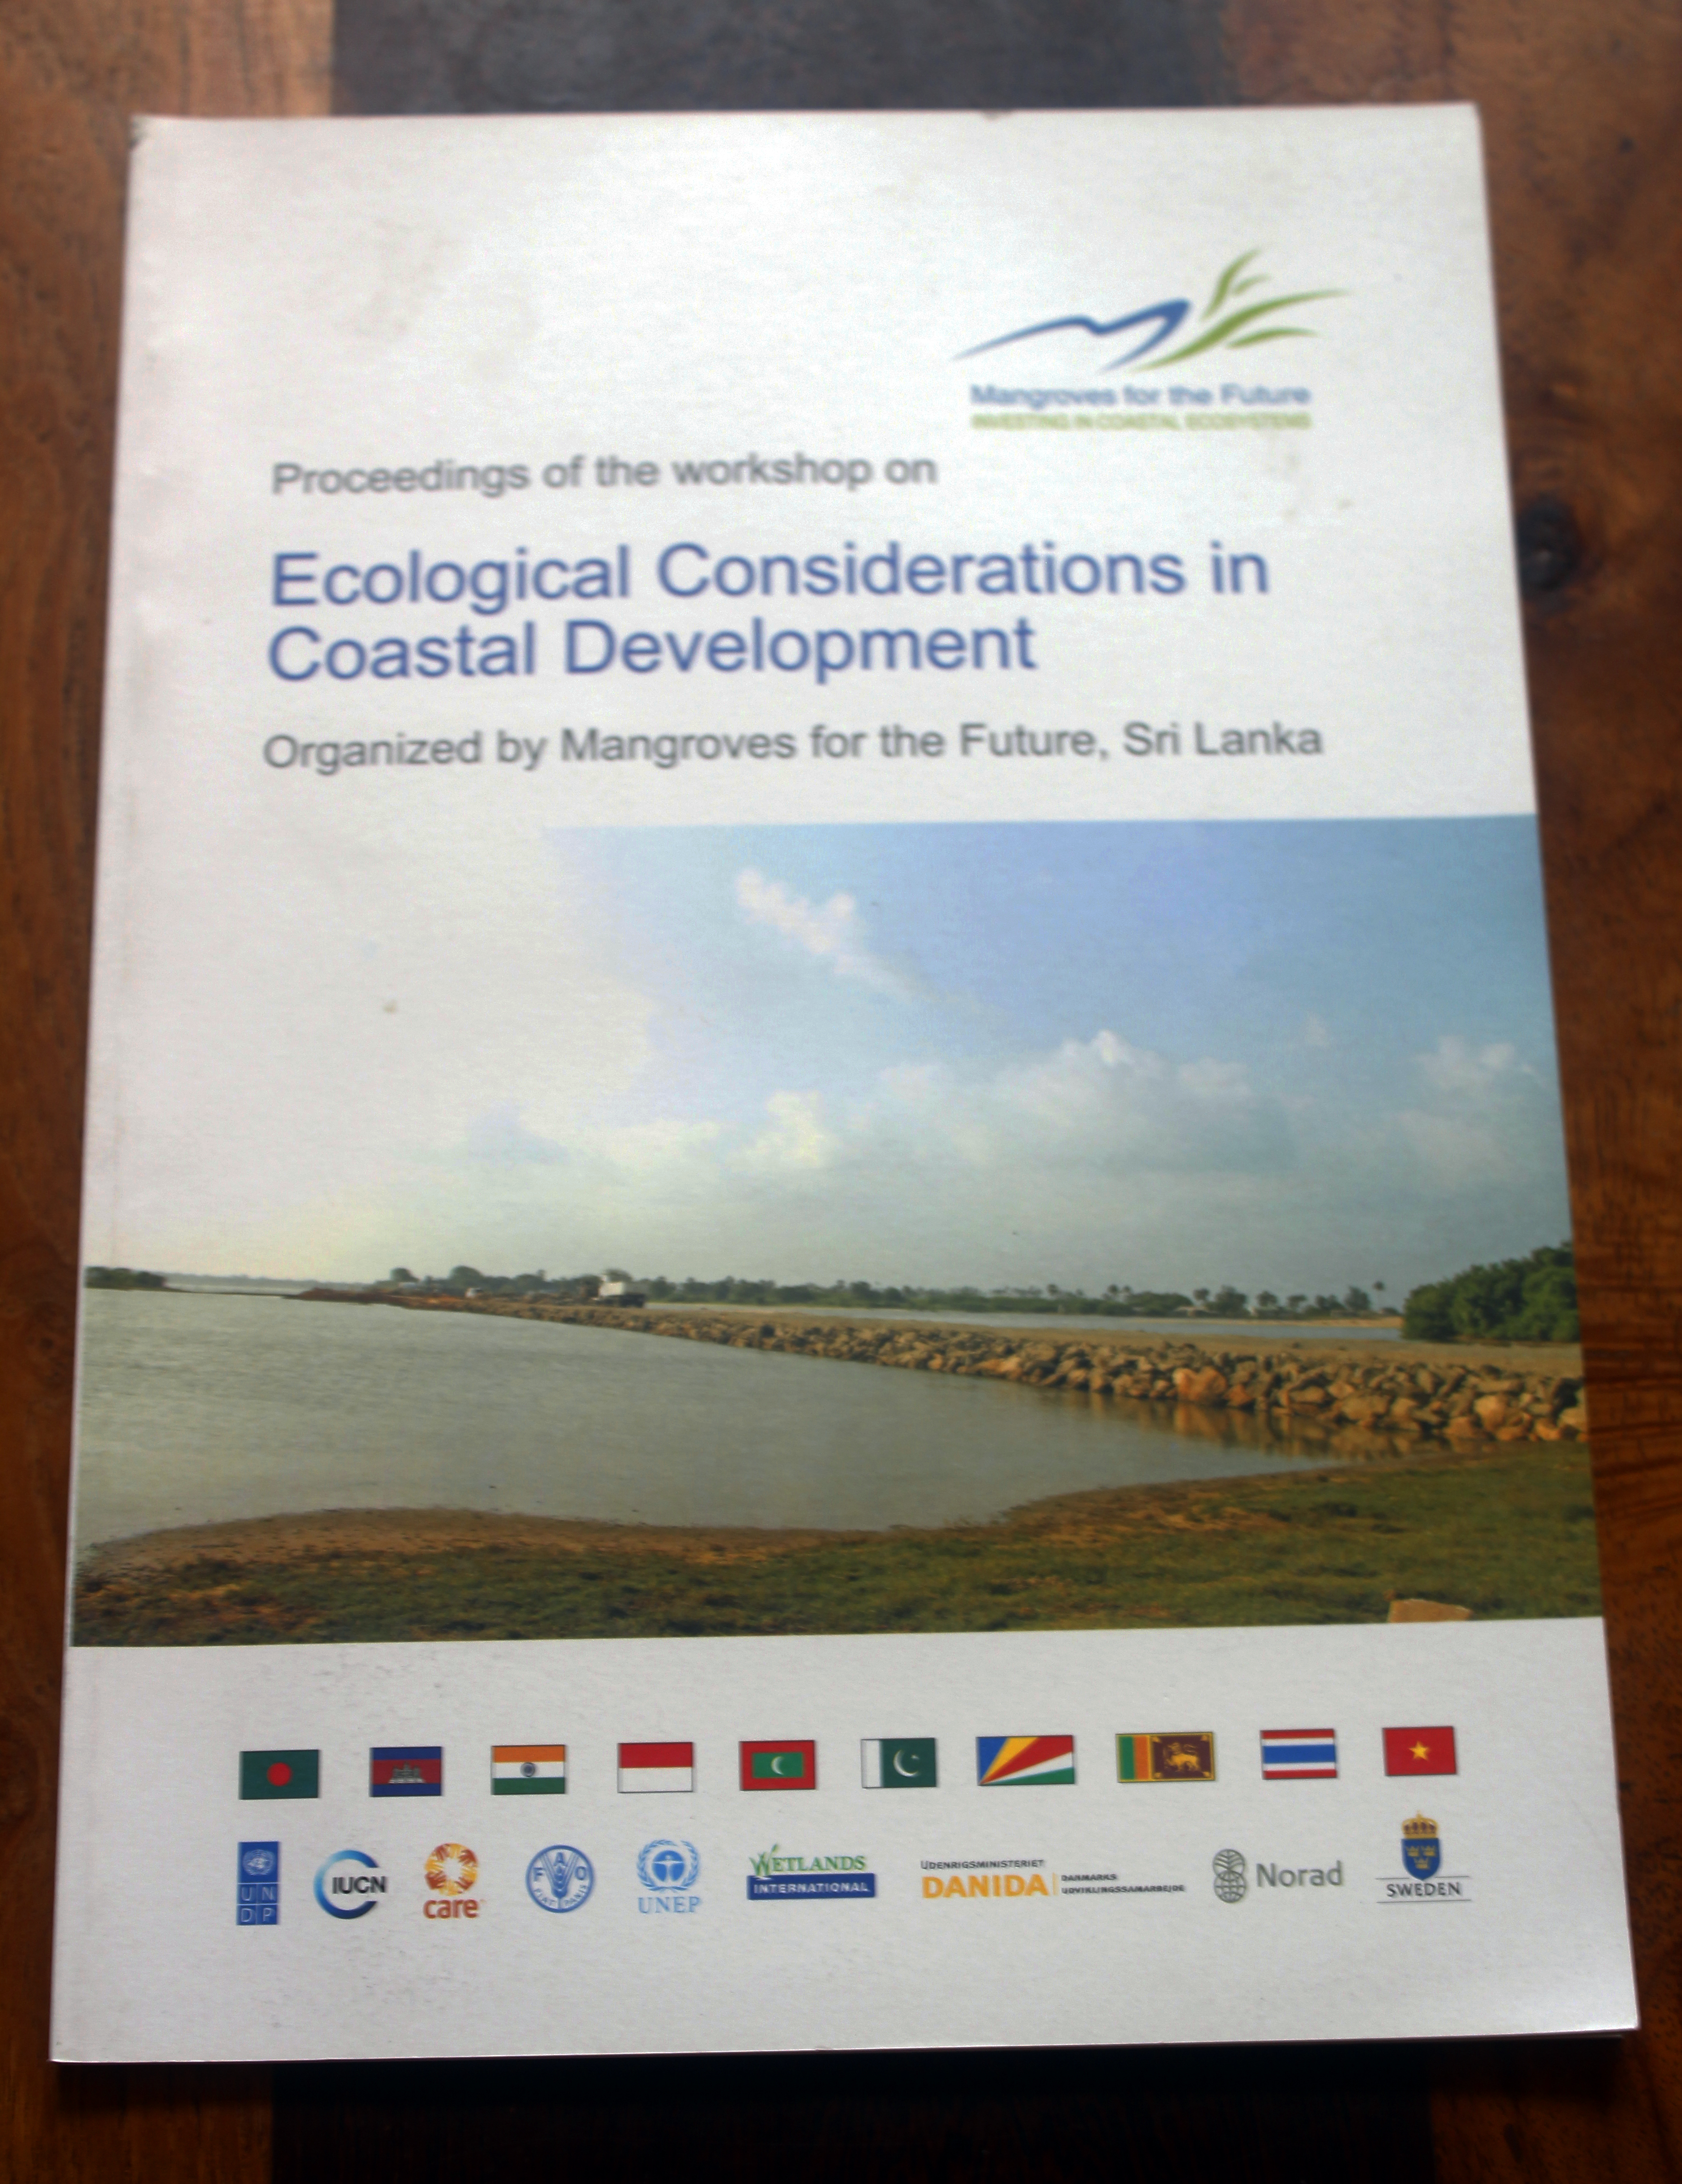 Proceeding of the workshop on Ecological Considerations in Coastal Development 